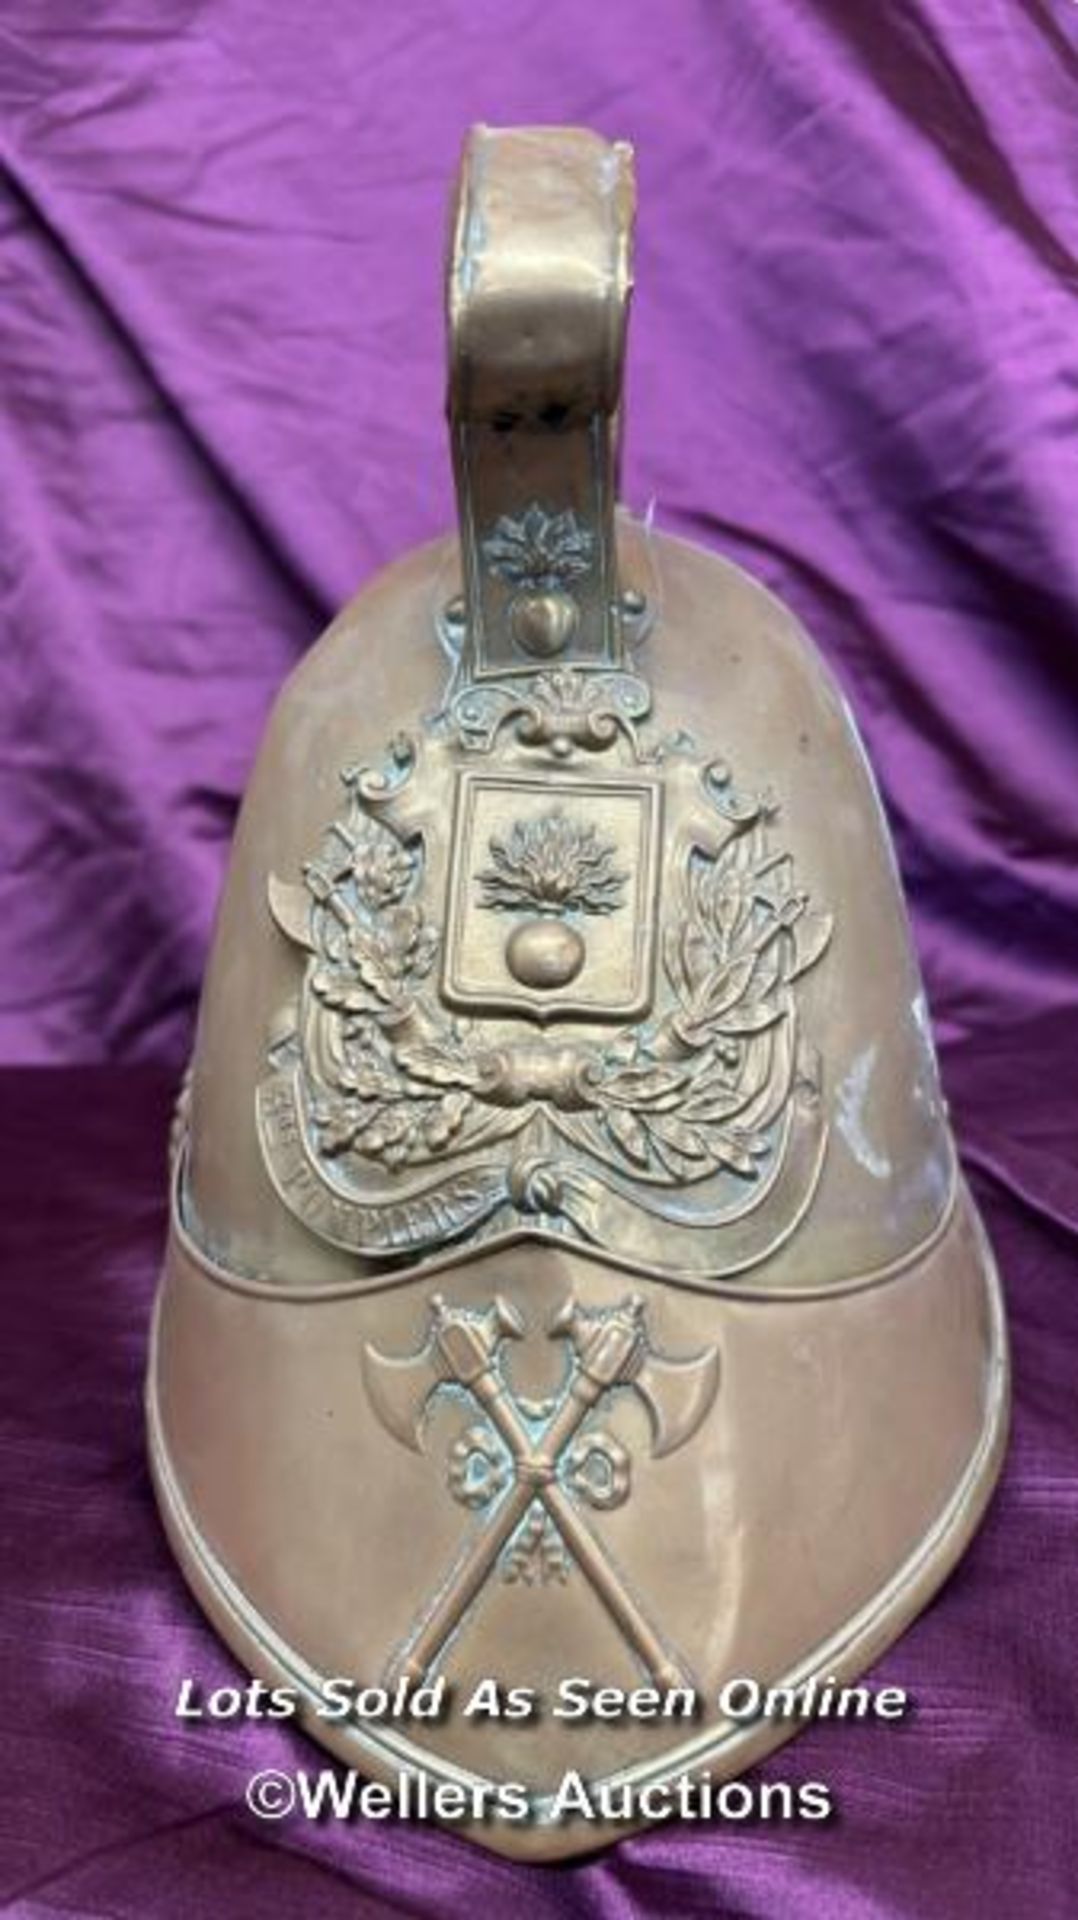 19TH CENTURY FRENCH SAPEURS-POMPIERS HELMET - Image 2 of 5